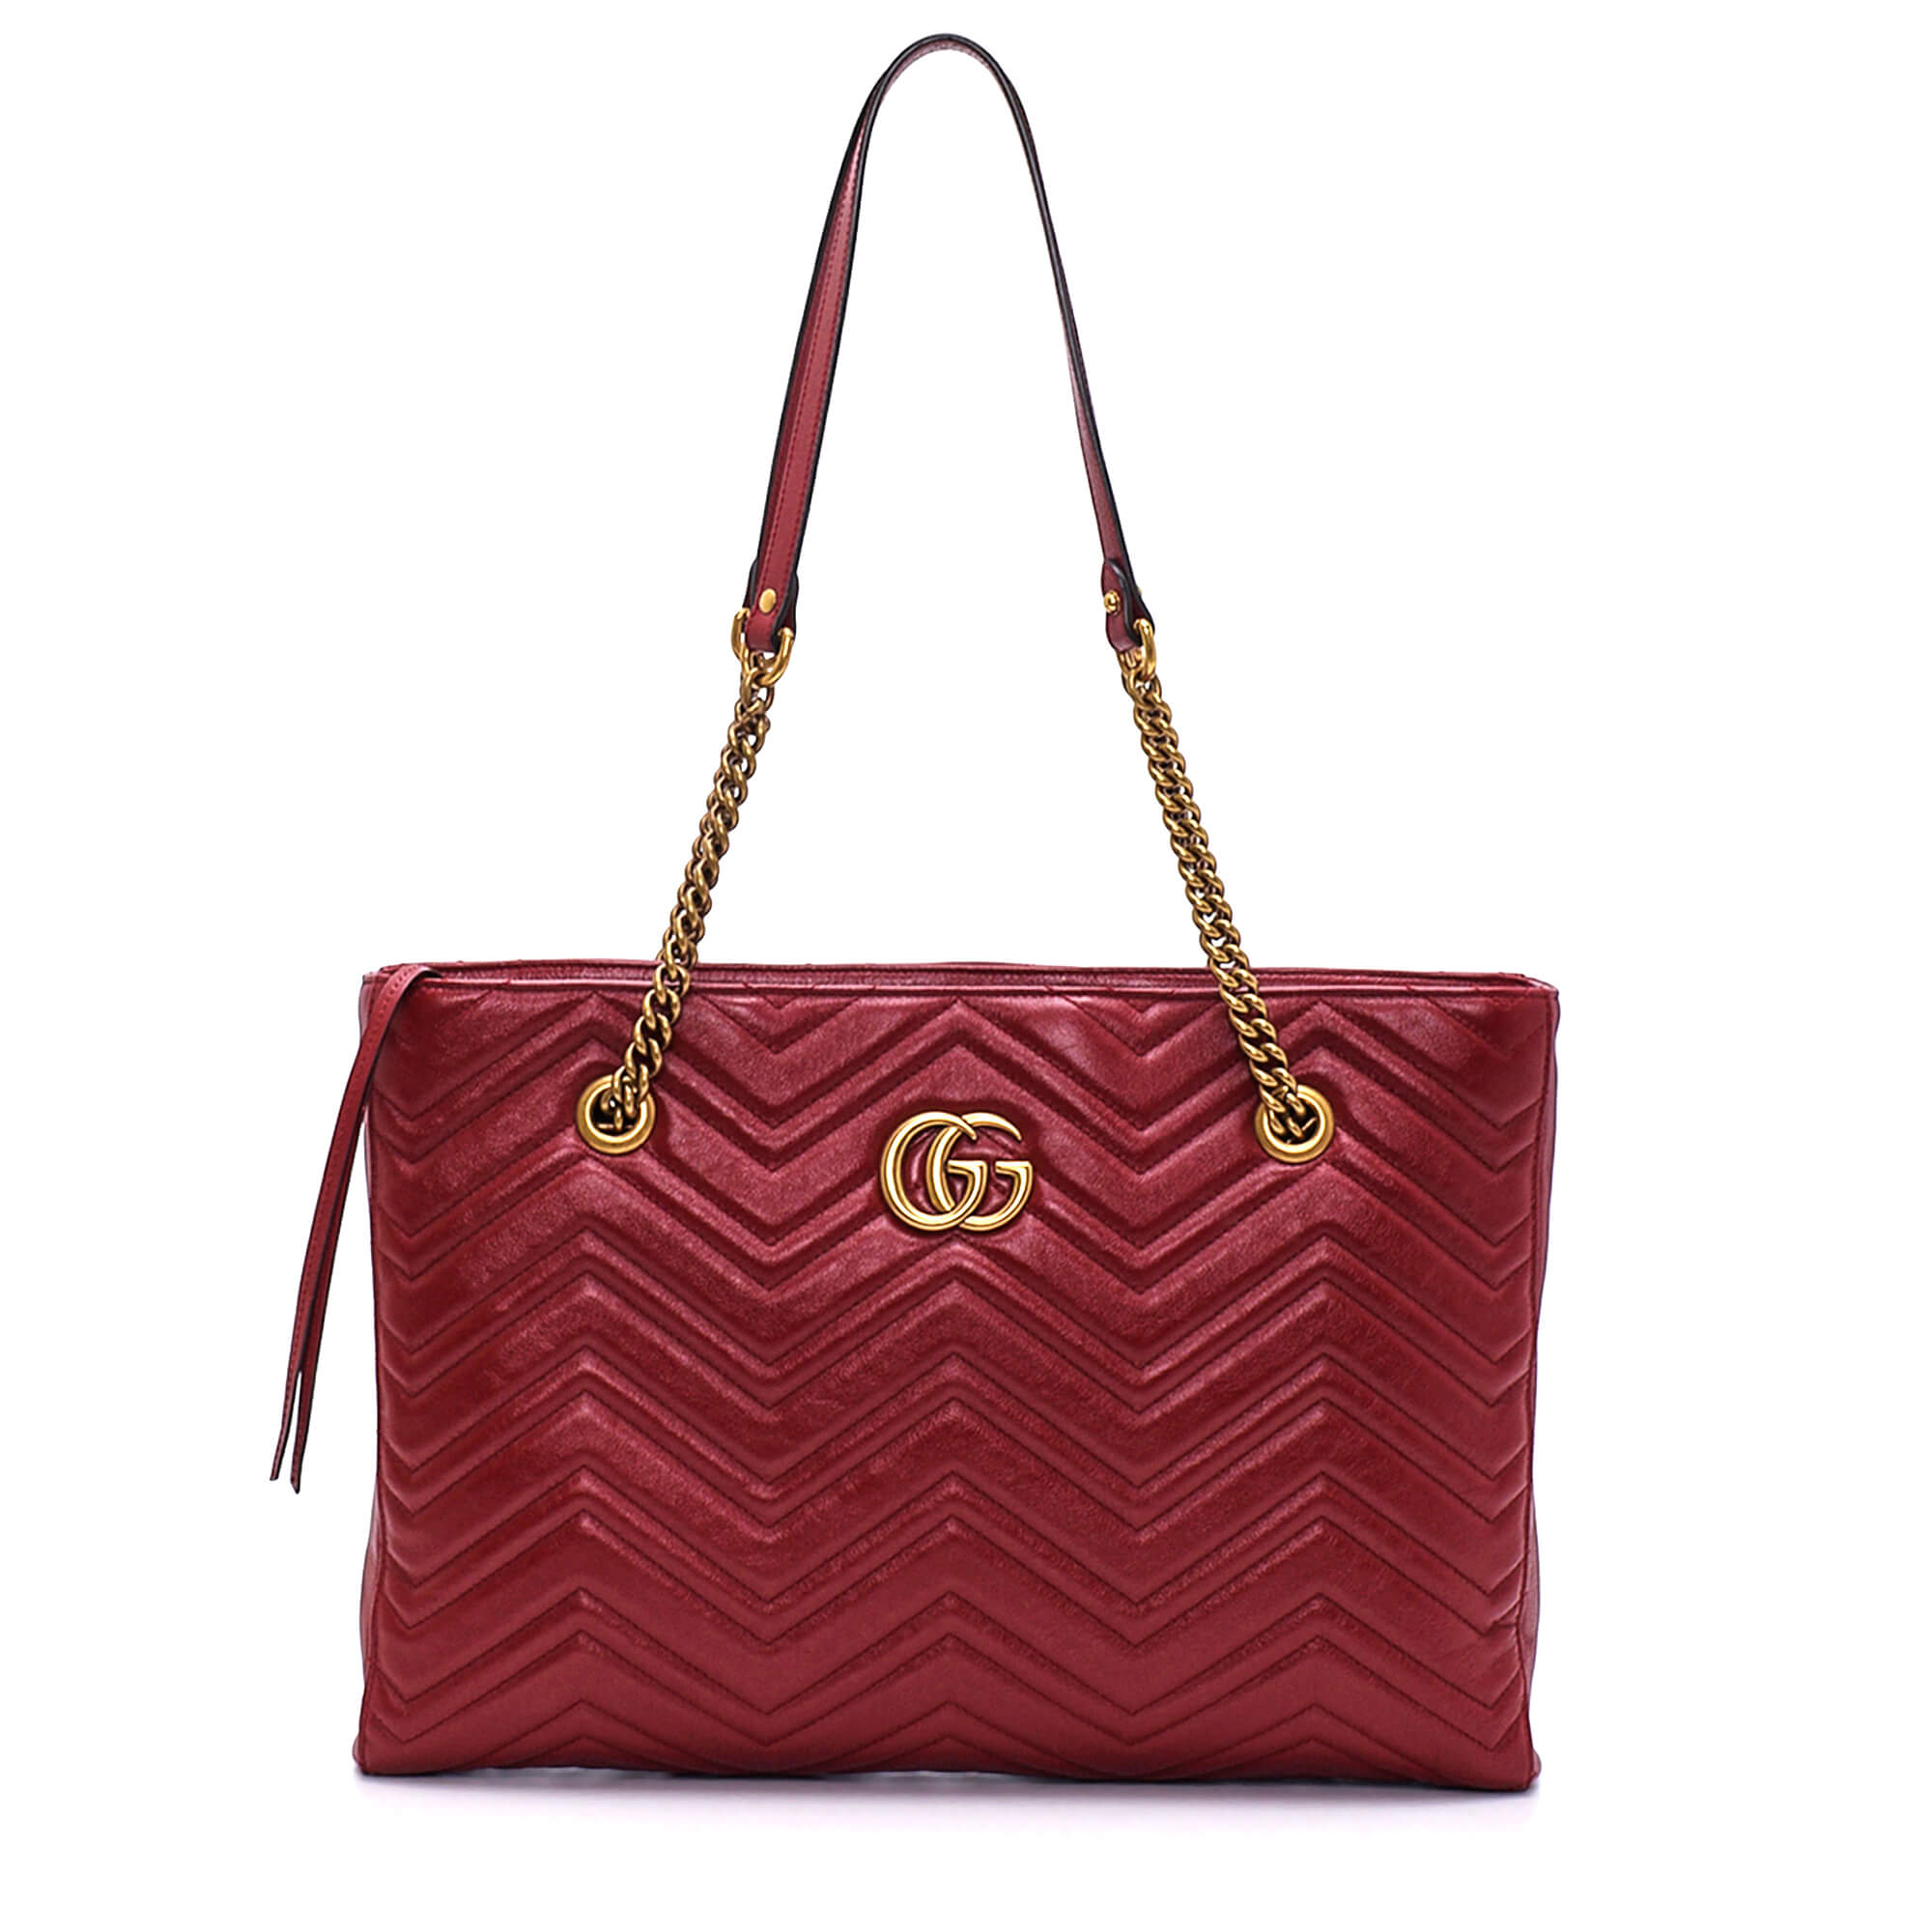 Gucci - Red Matelasse Leather GG Logo Tote Bag